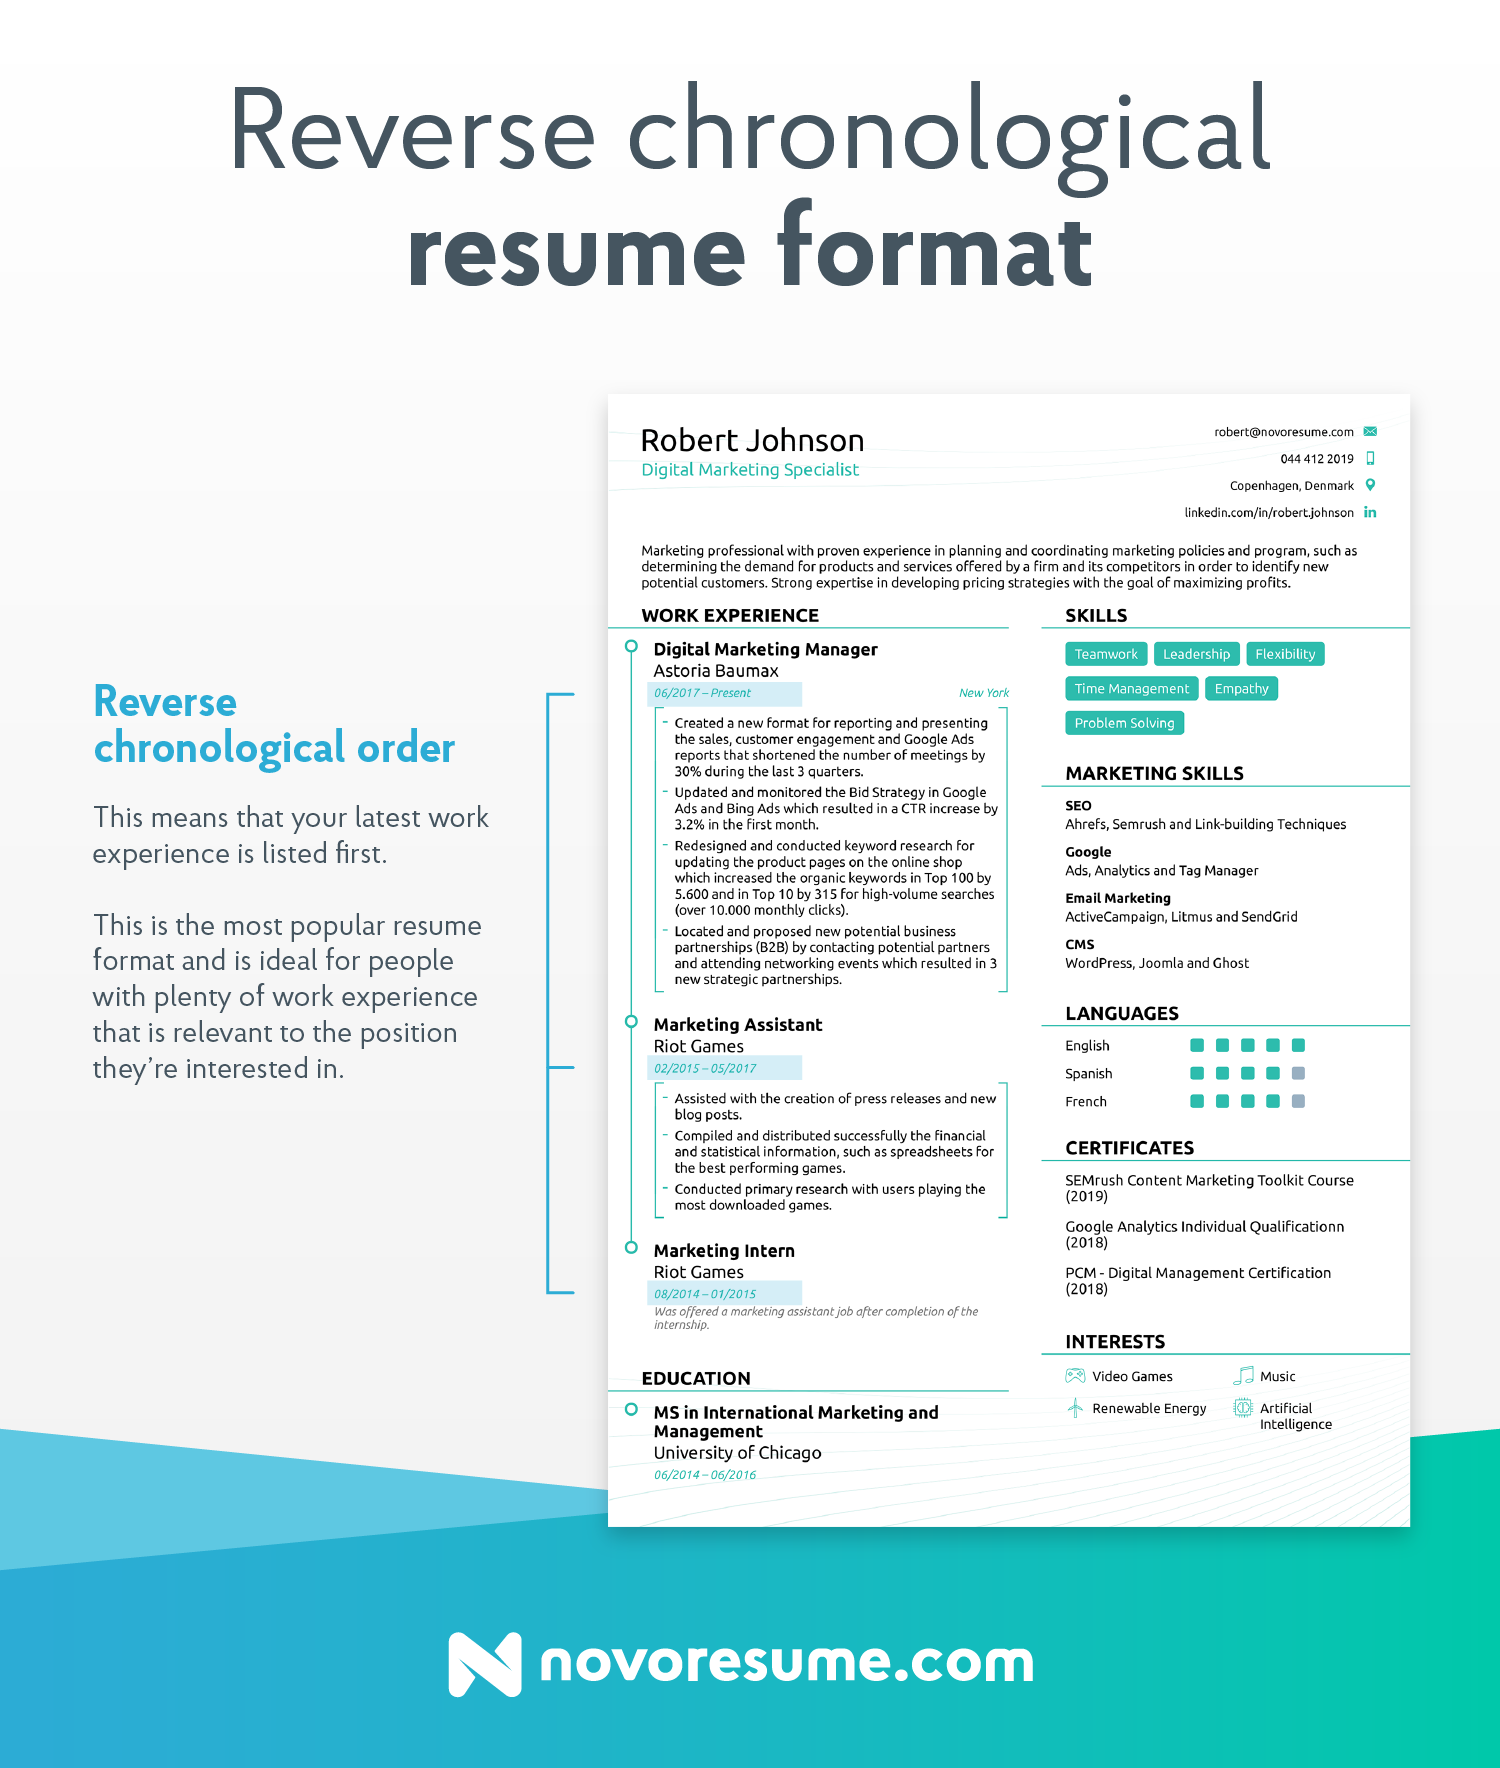 How to make resume for your first job